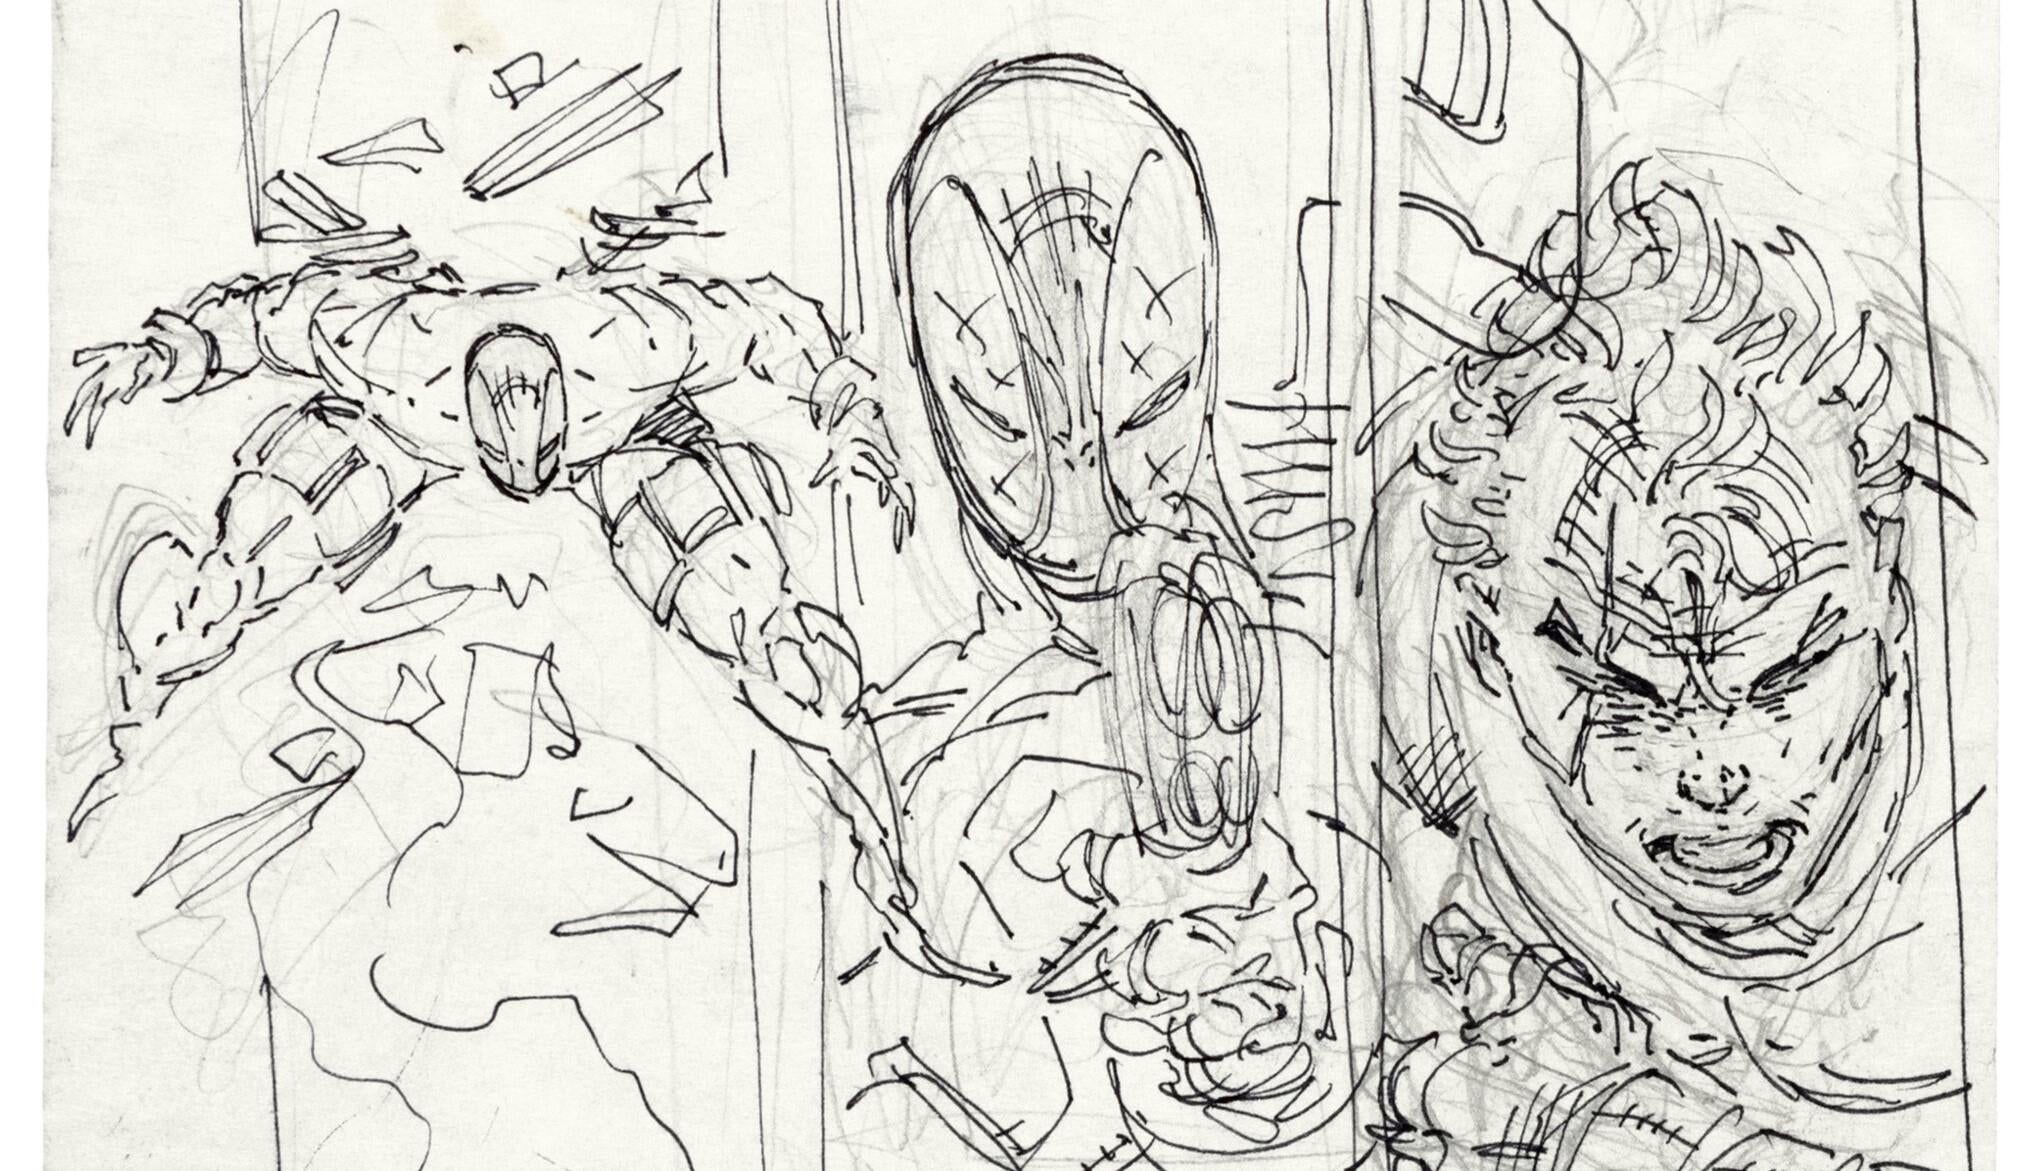 rob-liefeld-the-new-mutants-98-story-page-15-deadpools-first-appearance-preliminary-original-art-heritage-auctions